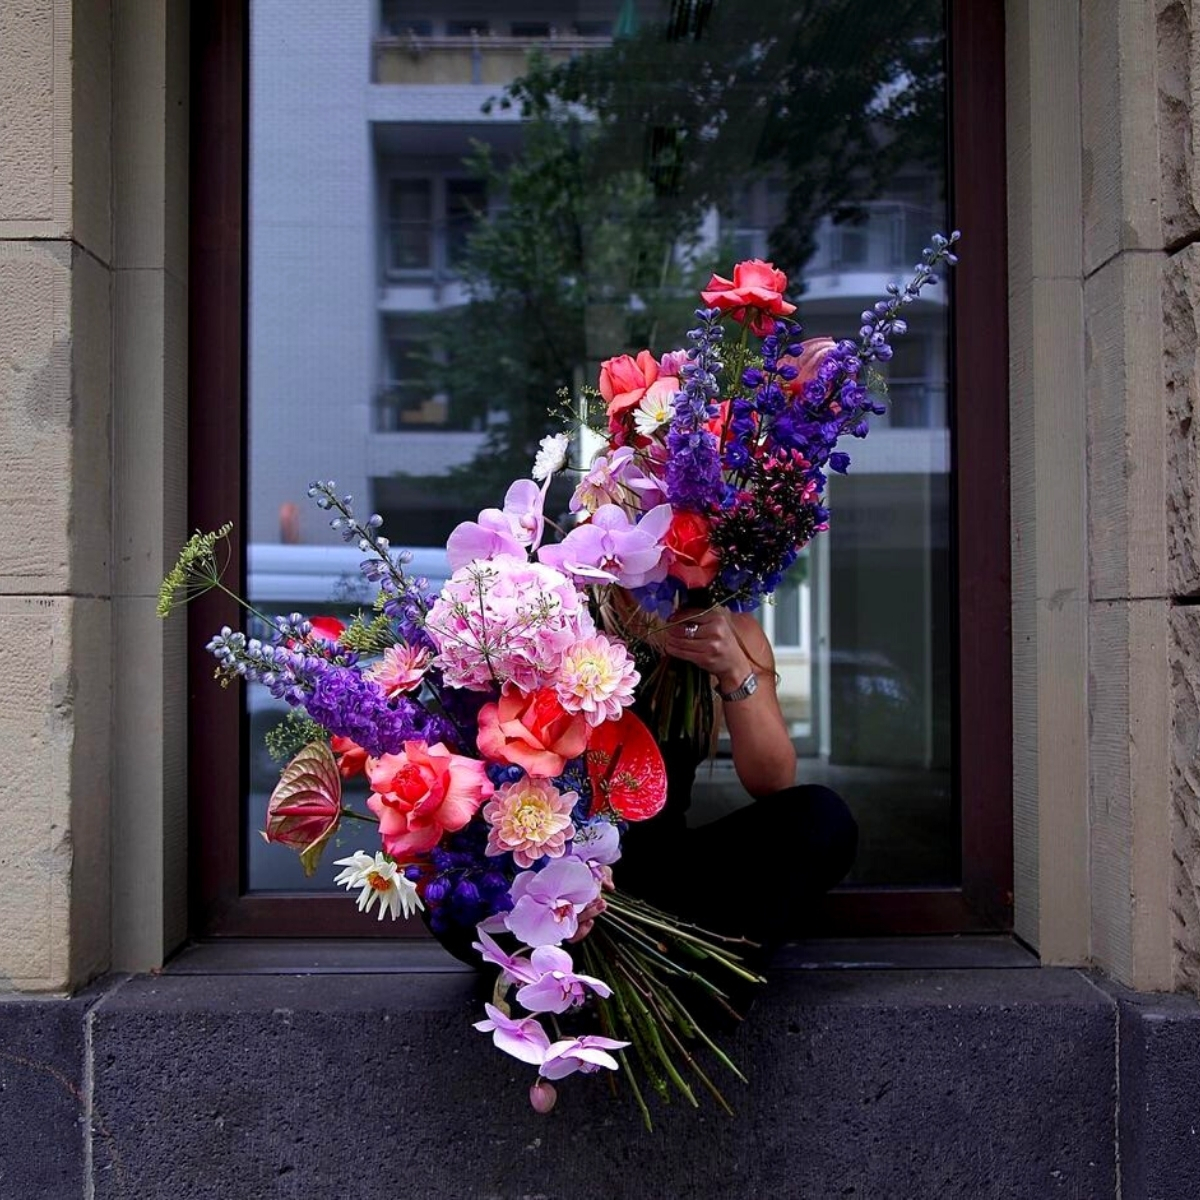 marsano-berlin-the-power-of-change-in-bouquets-featured